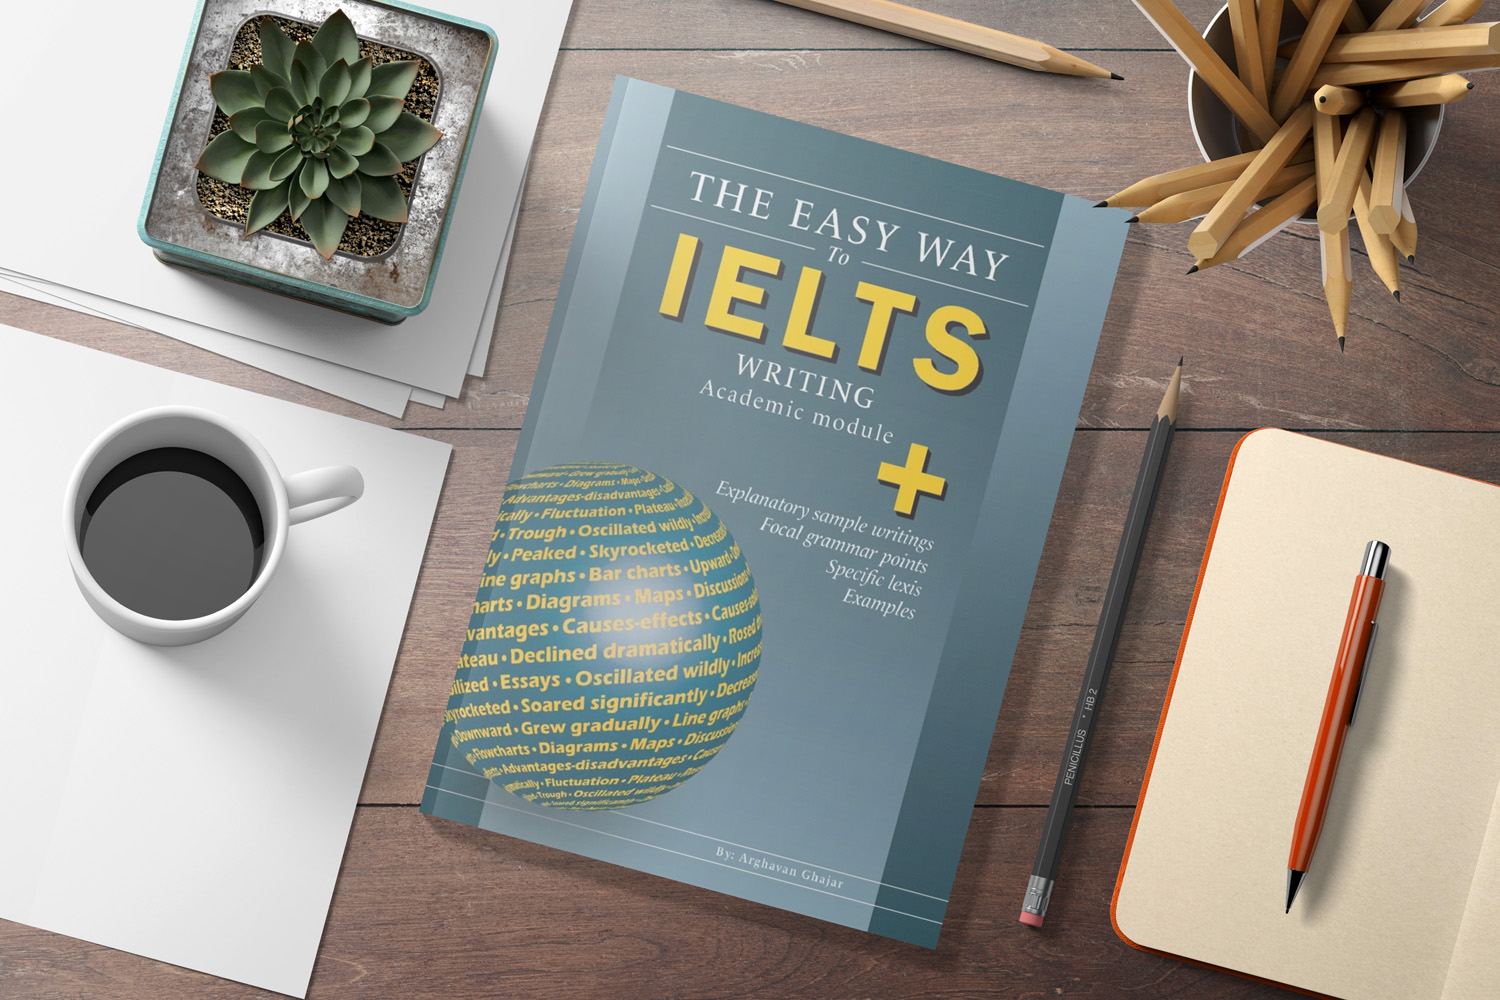 THE EASY WAY TO IELTS WRITING